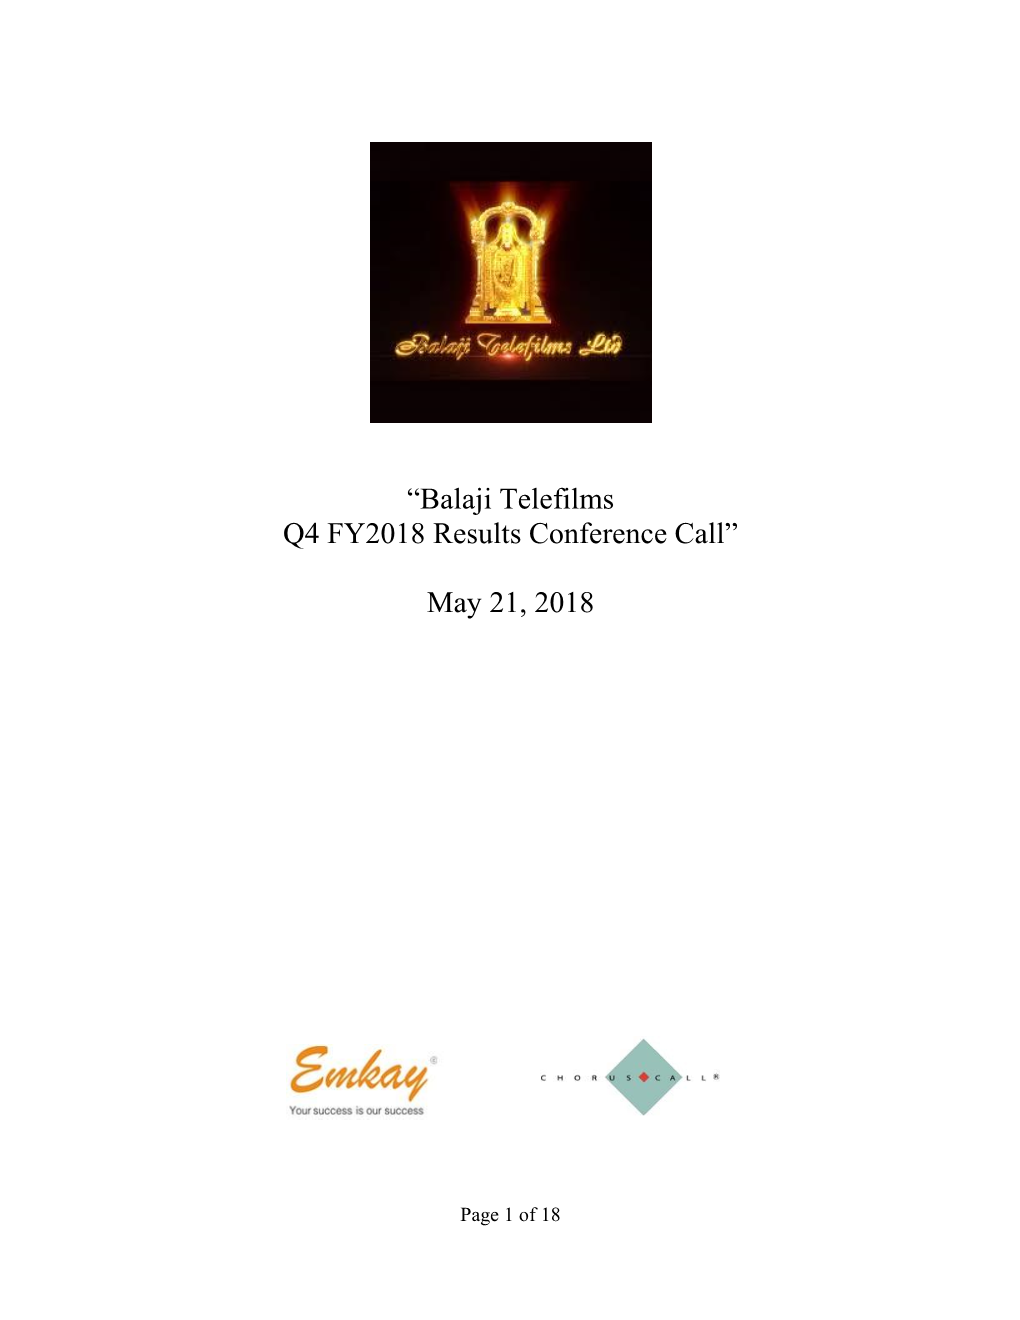 “Balaji Telefilms Q4 FY2018 Results Conference Call” May 21, 2018